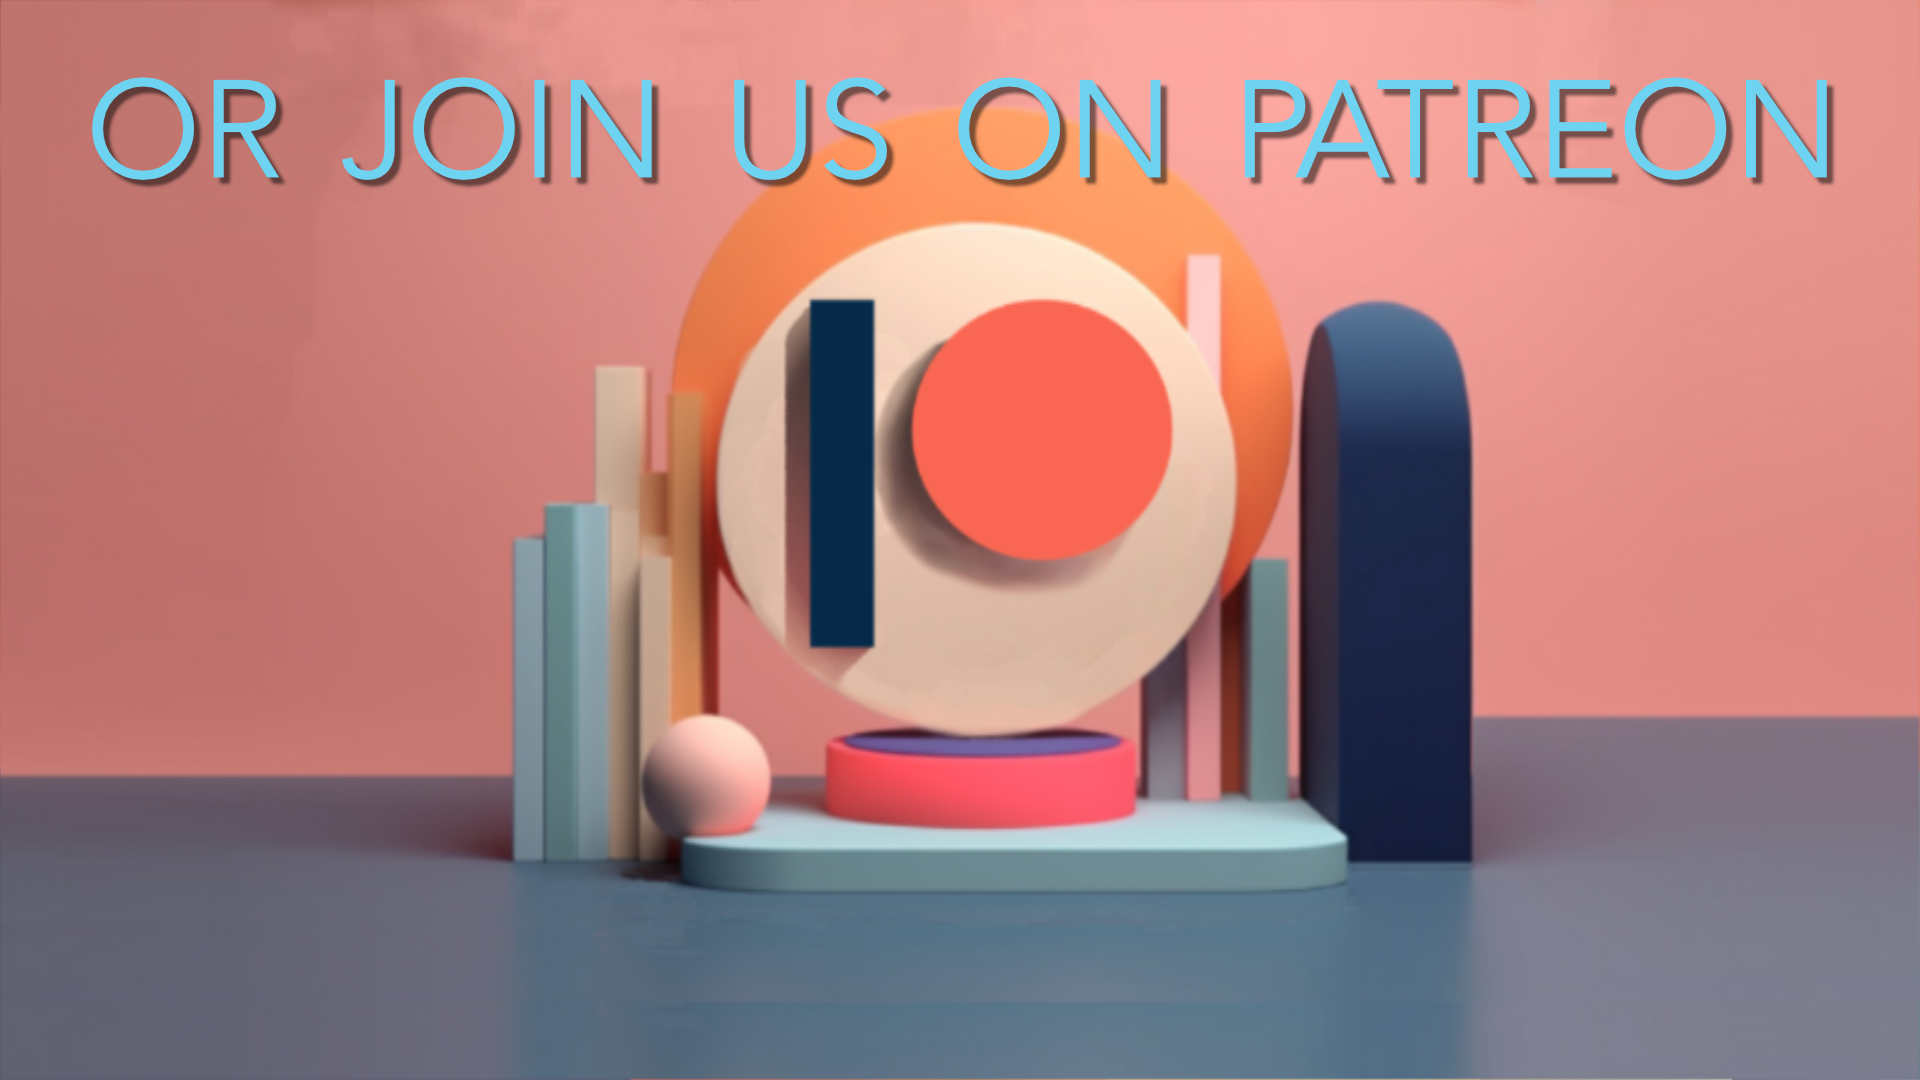 Join us on Patreon